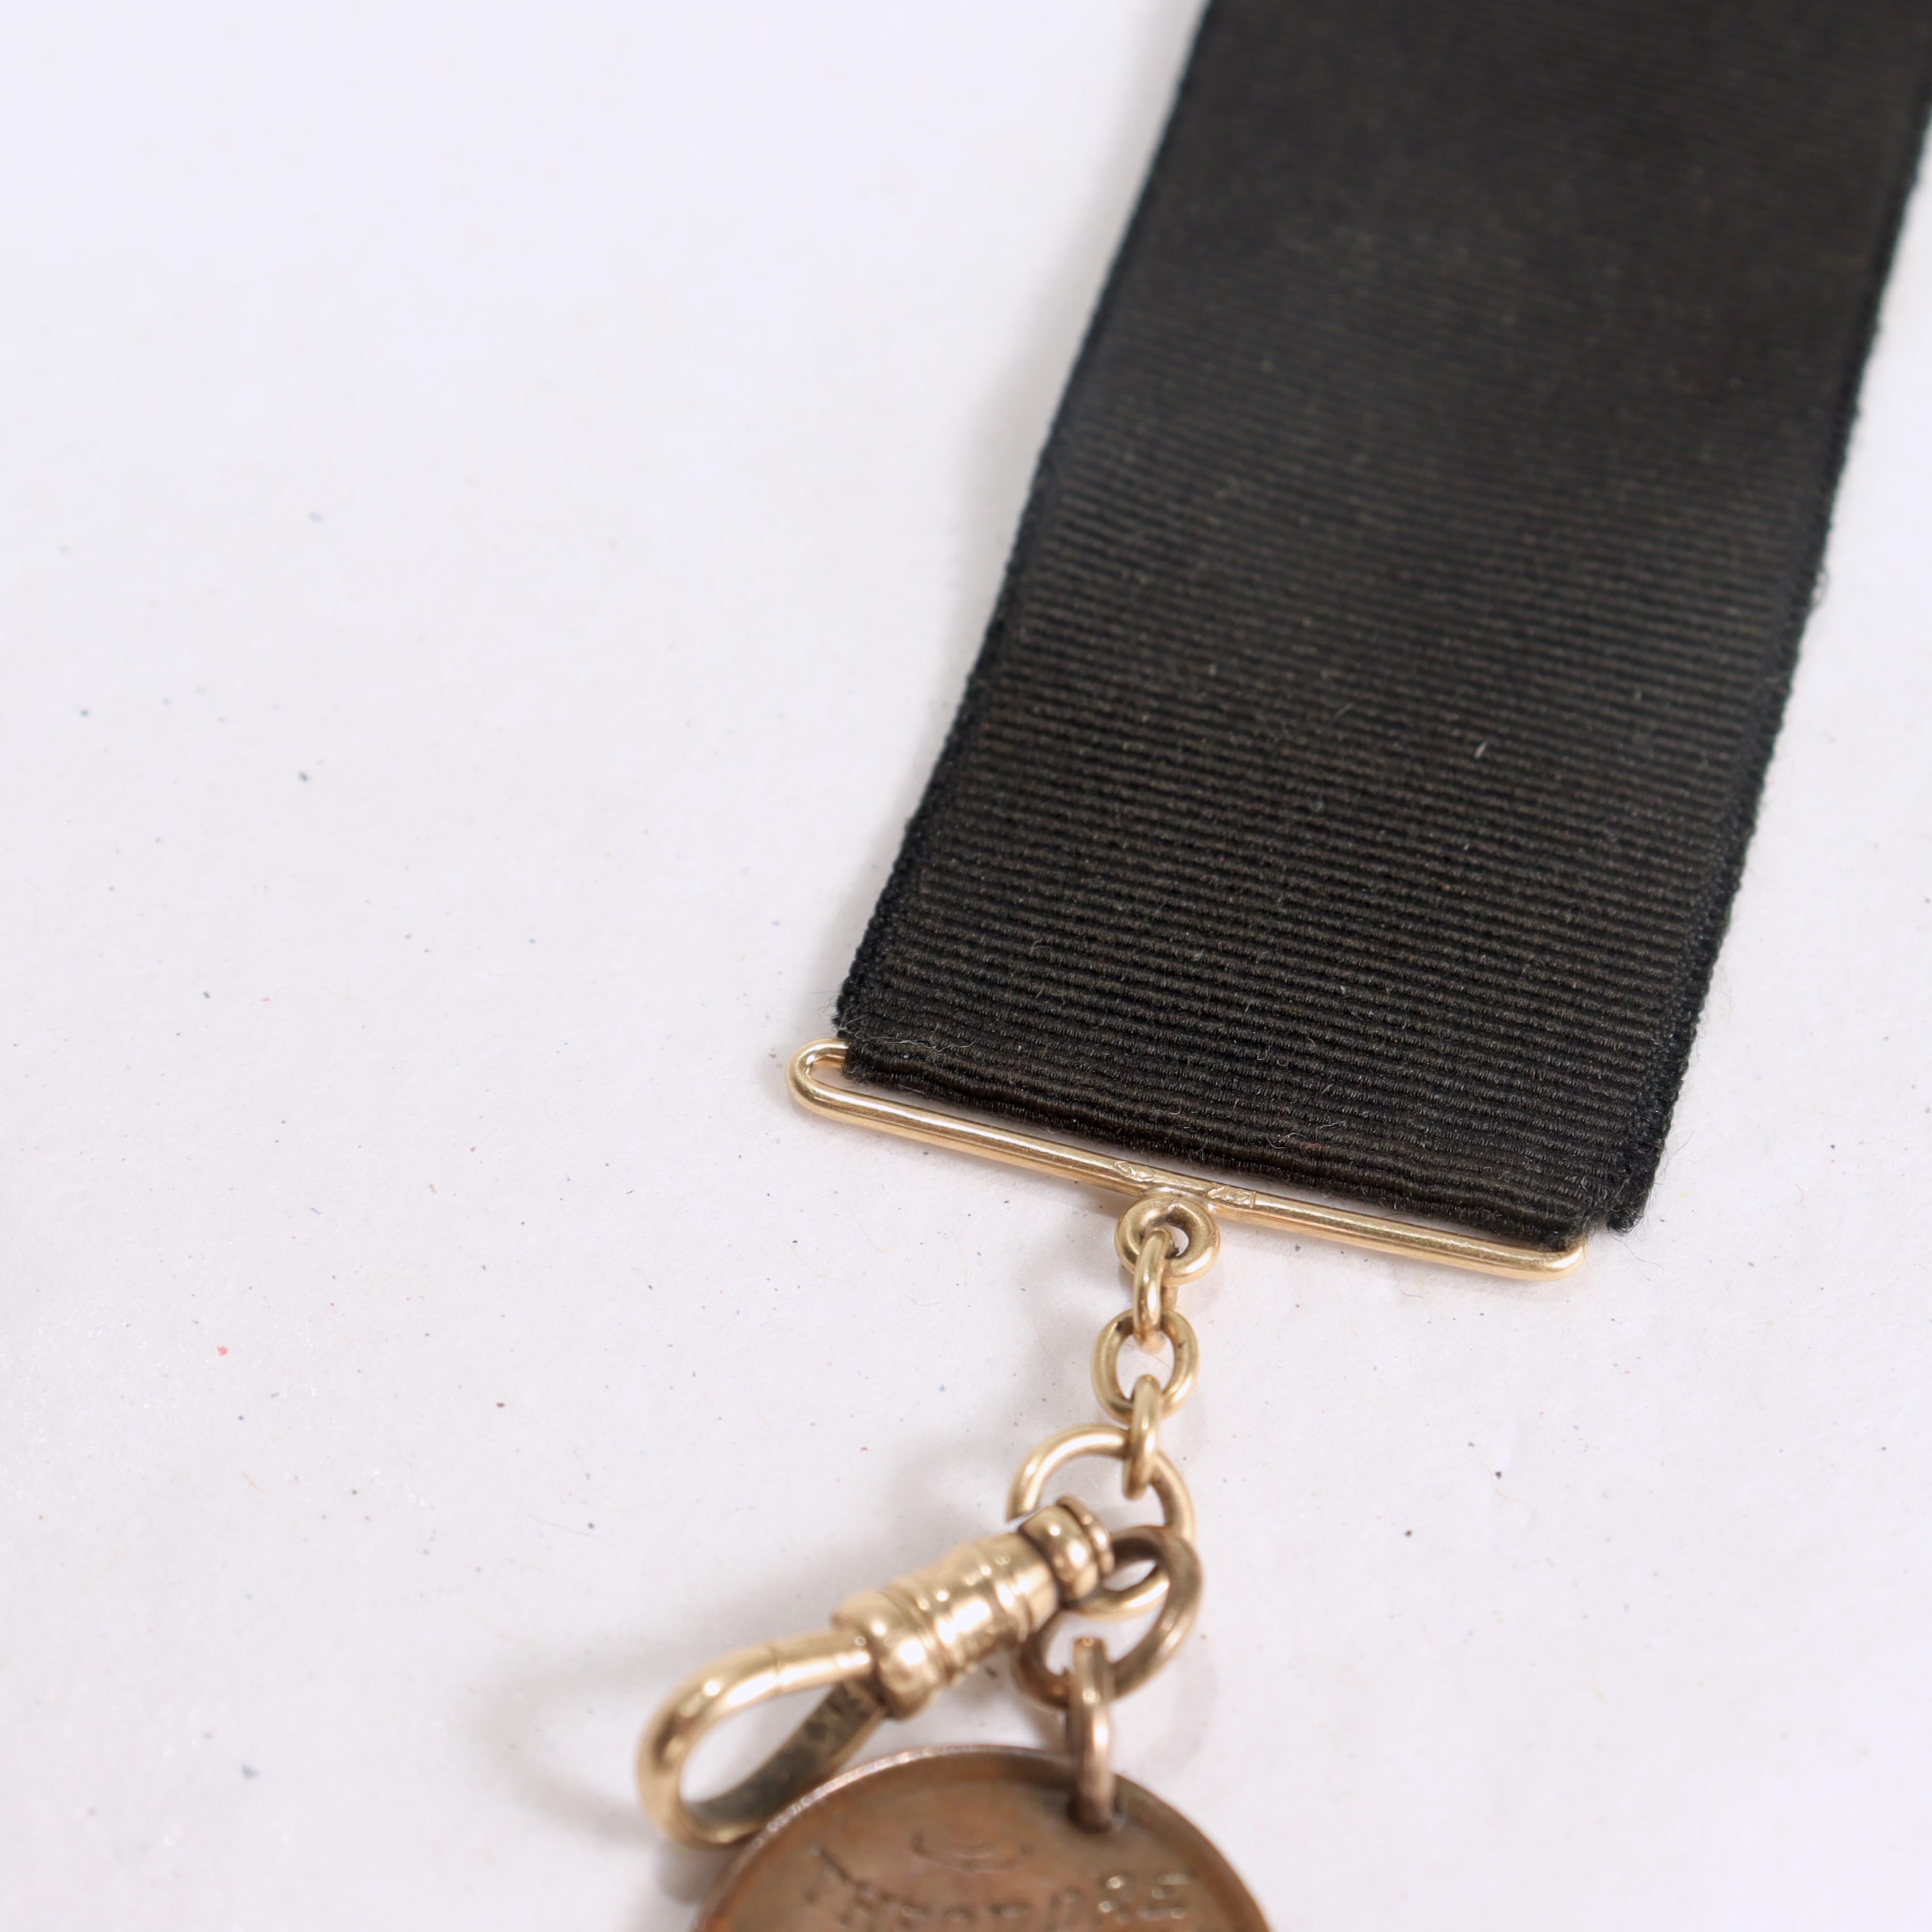 Presentation Indian Penny / Gold Quartz Watch Fob from President Teddy Roosevelt In Good Condition For Sale In Philadelphia, PA